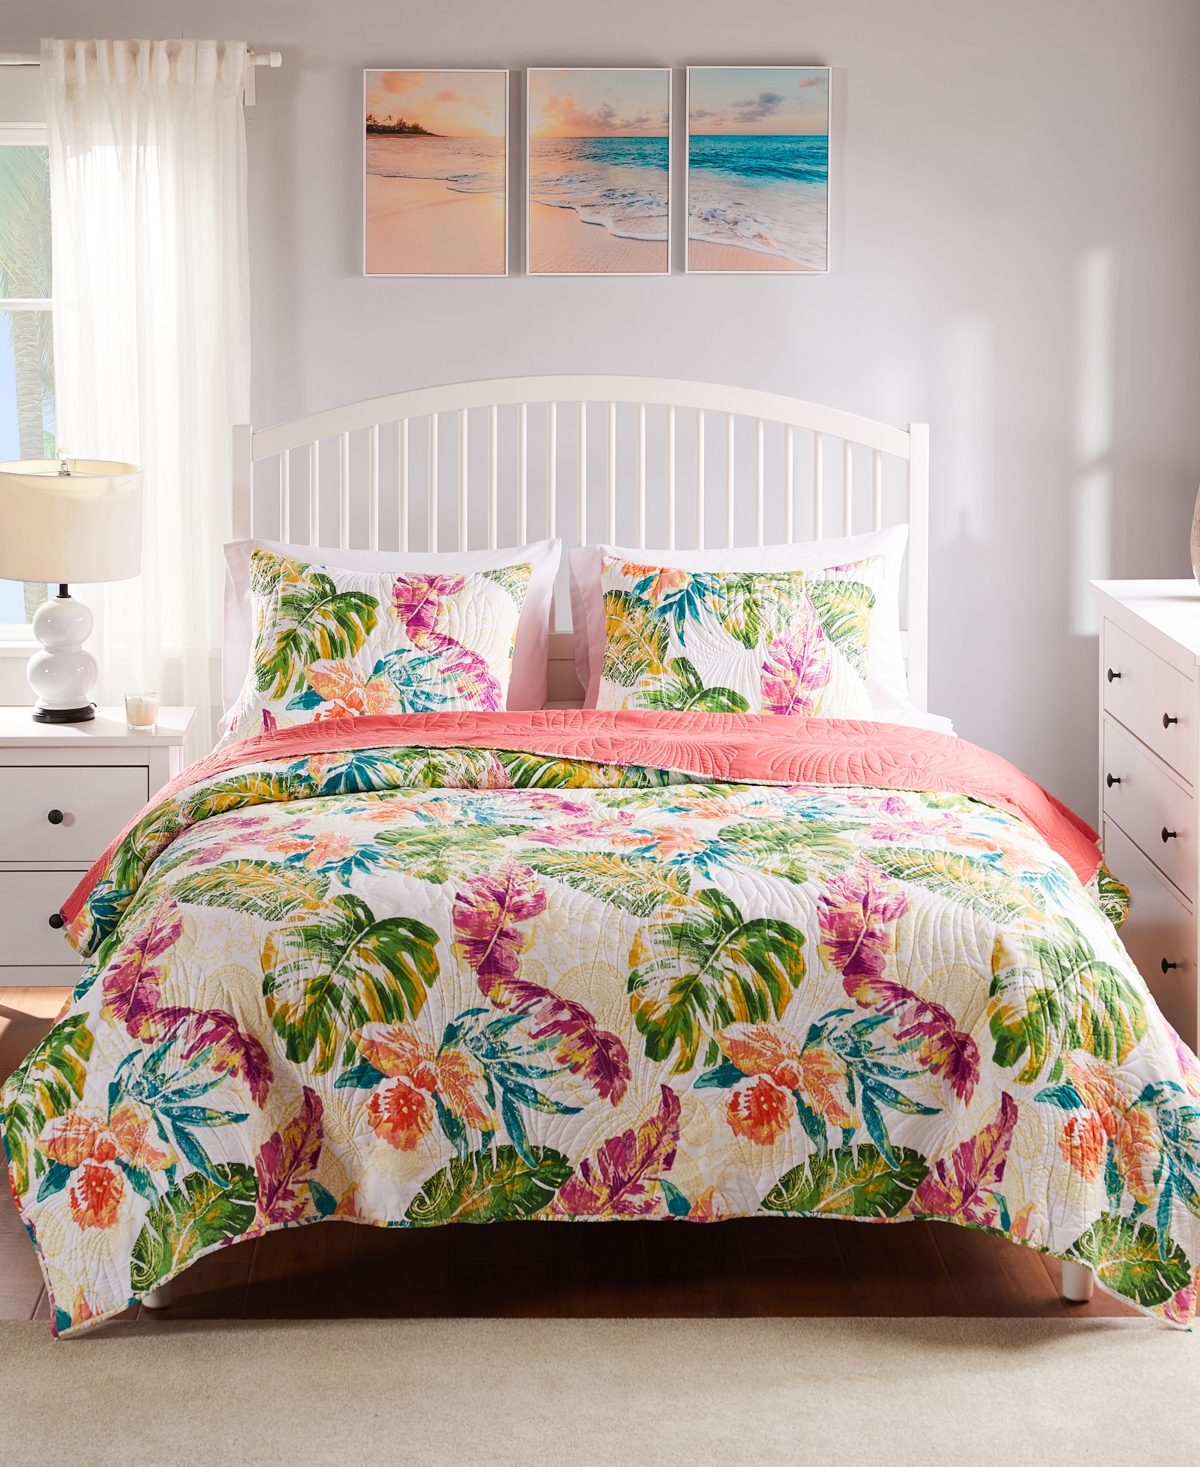 Greenland Home Fashions Tropics Coastal Palm 2 Piece Quilt Set, Twin/twin Xl In Coral